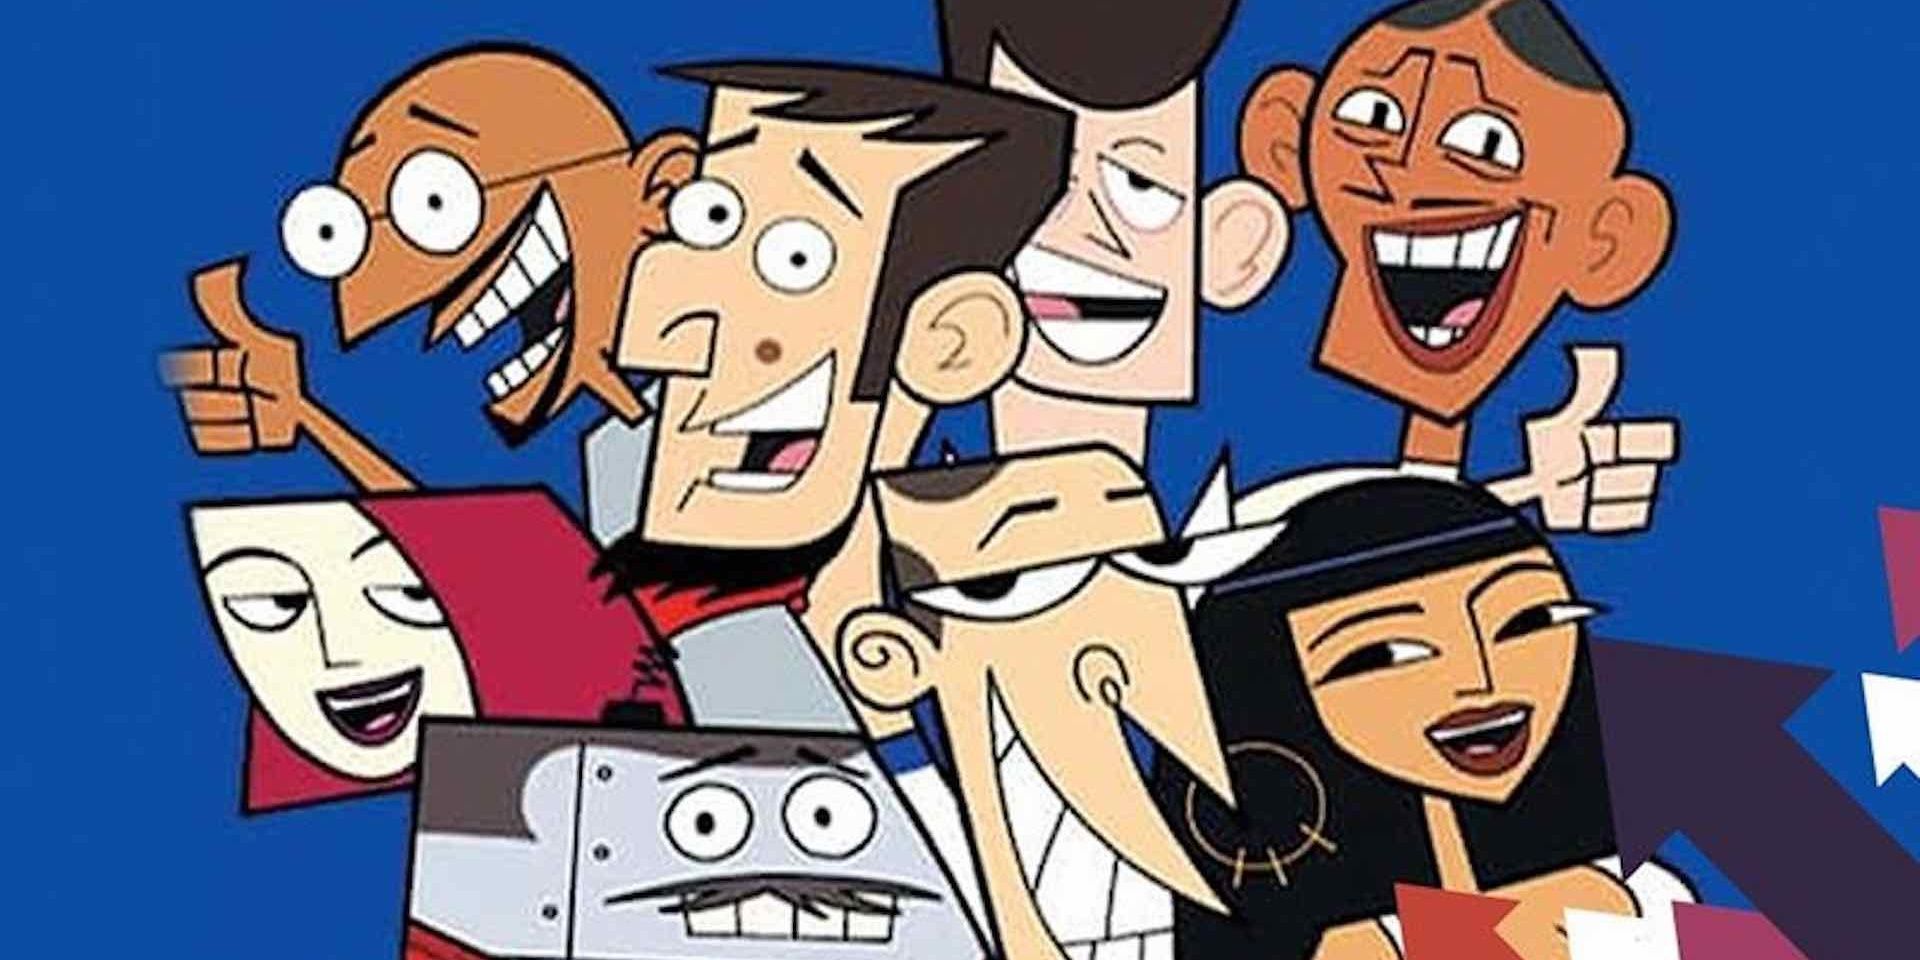 The main characters from the MTV show Clone High